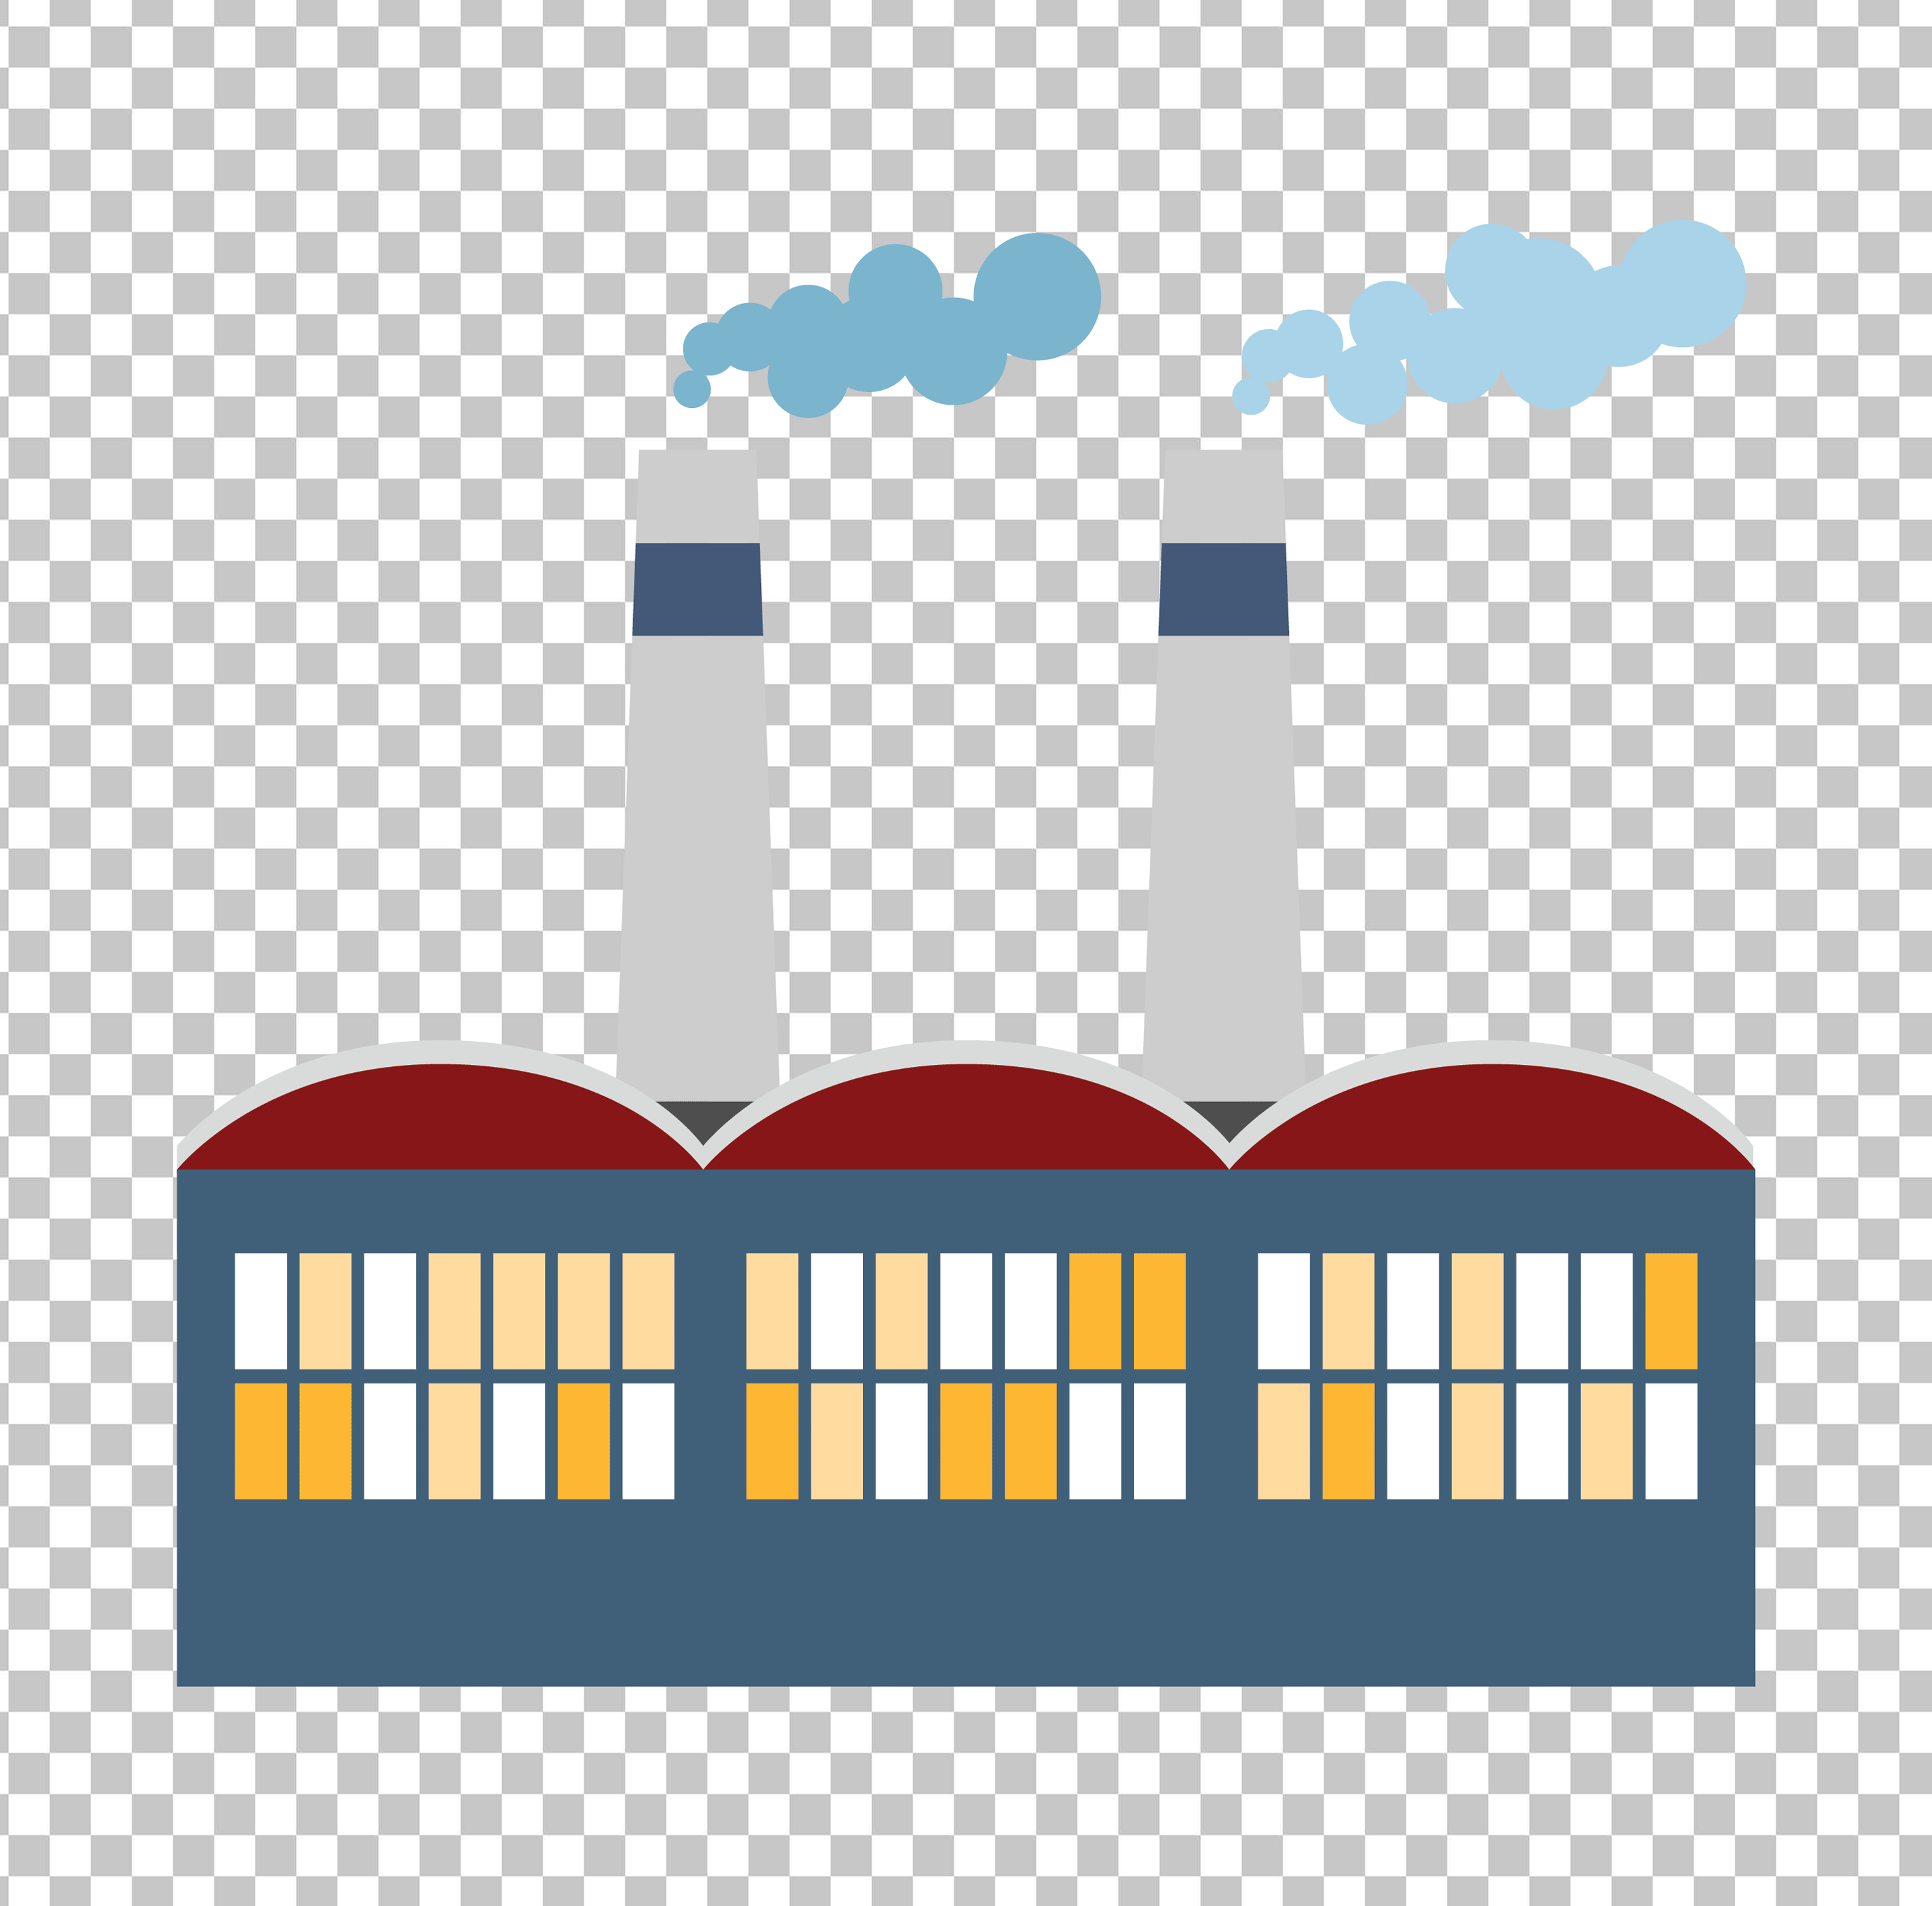 Factory with Smoke Chimneys PNG Image